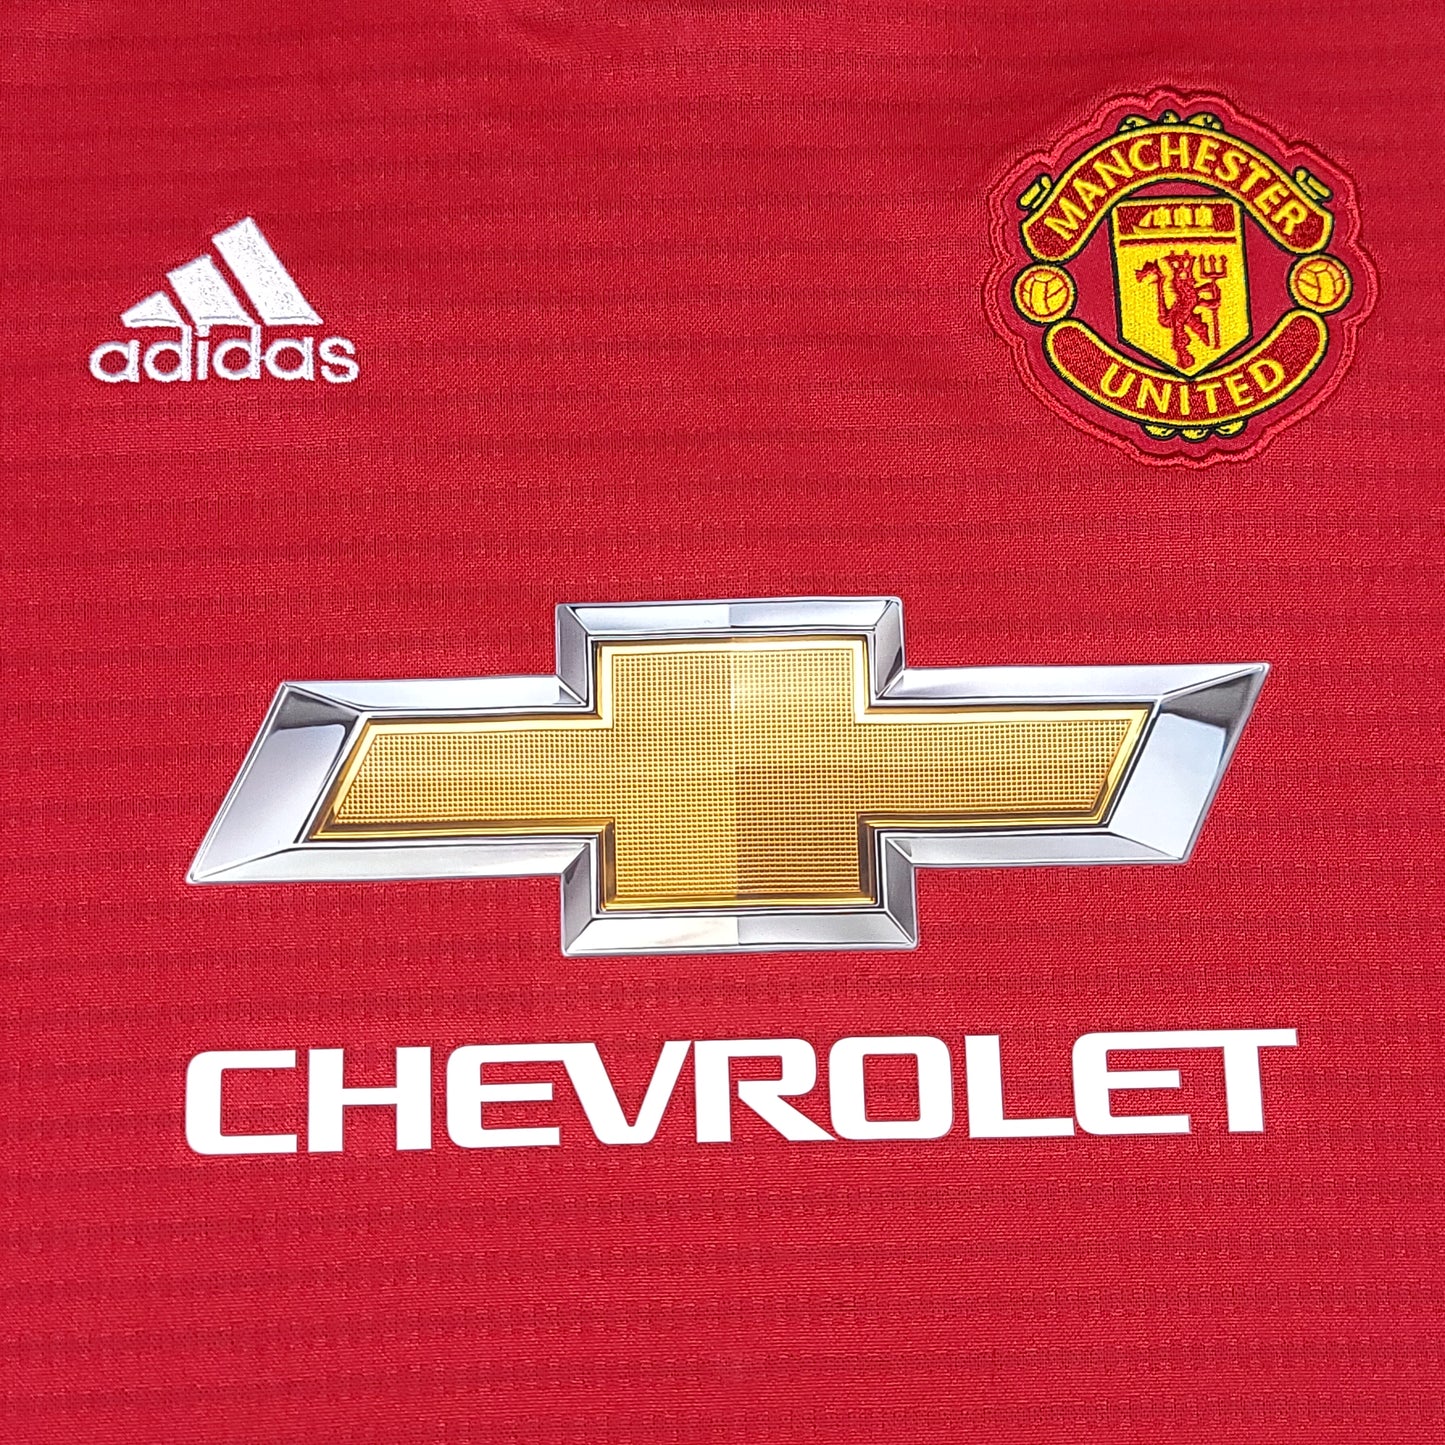 Manchester United 2018-19 Red adidas Soccer Jersey